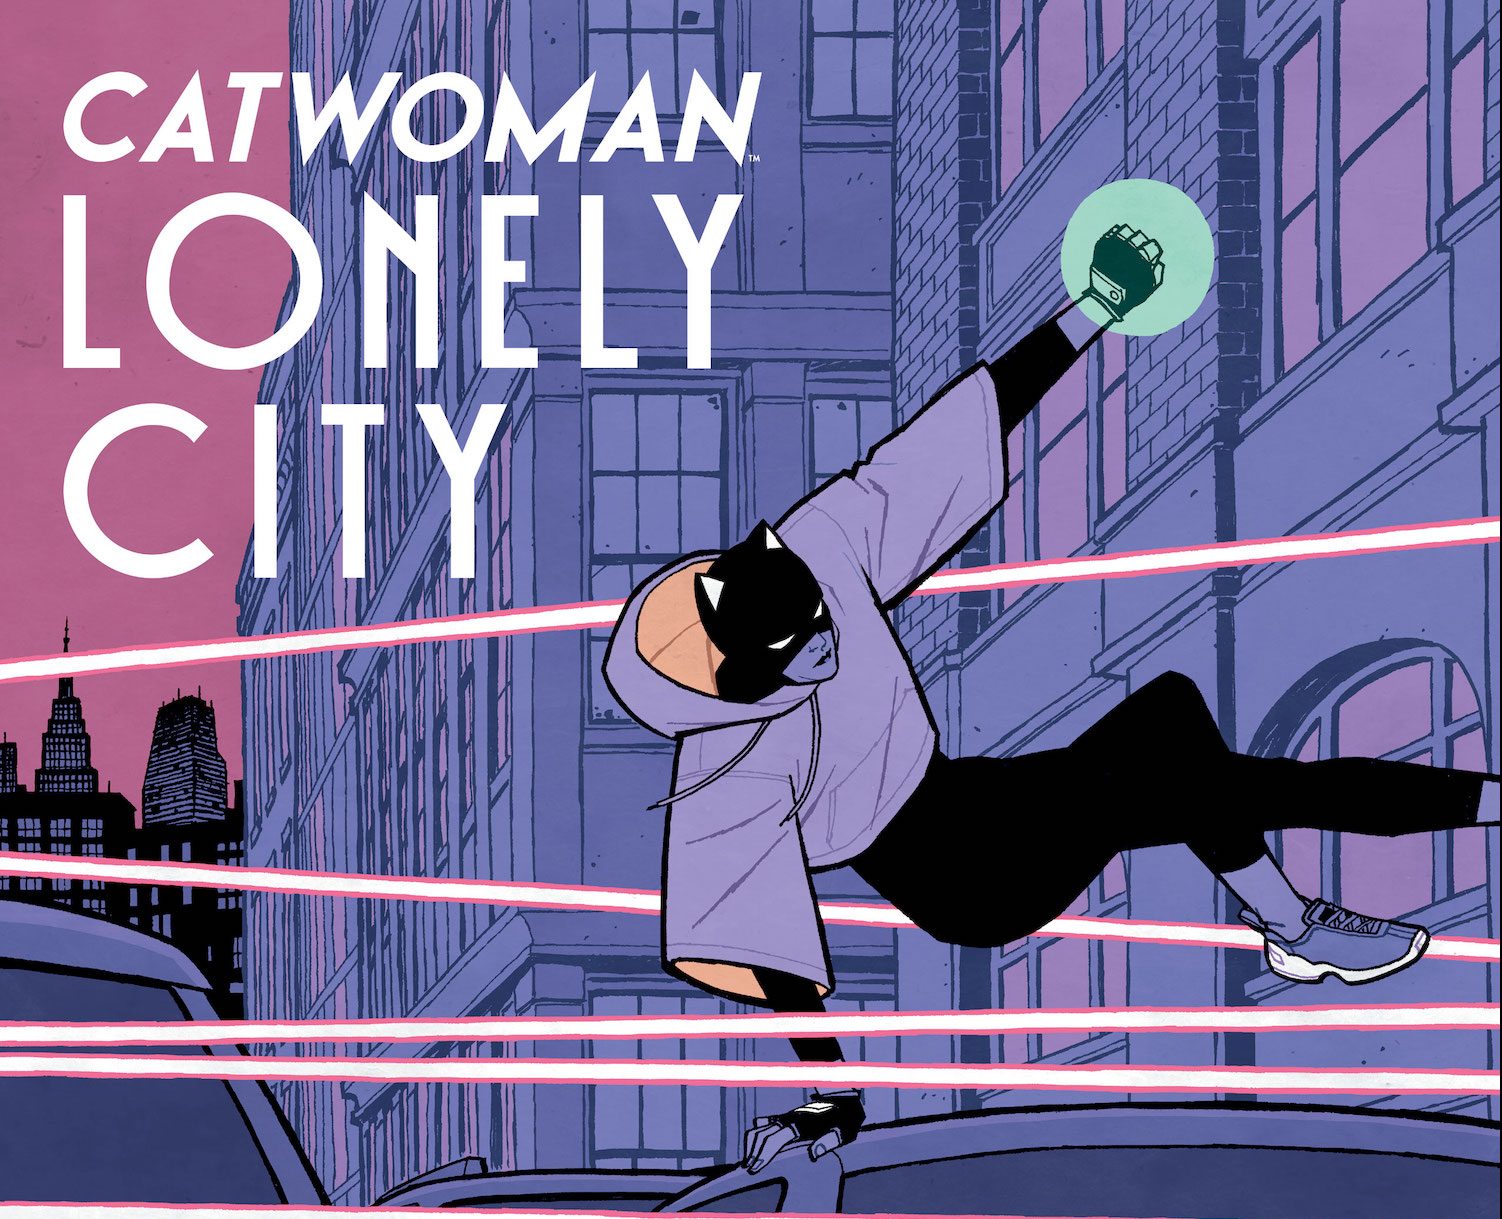 'Catwoman: Lonely City' #2 review: The city becomes less lonely